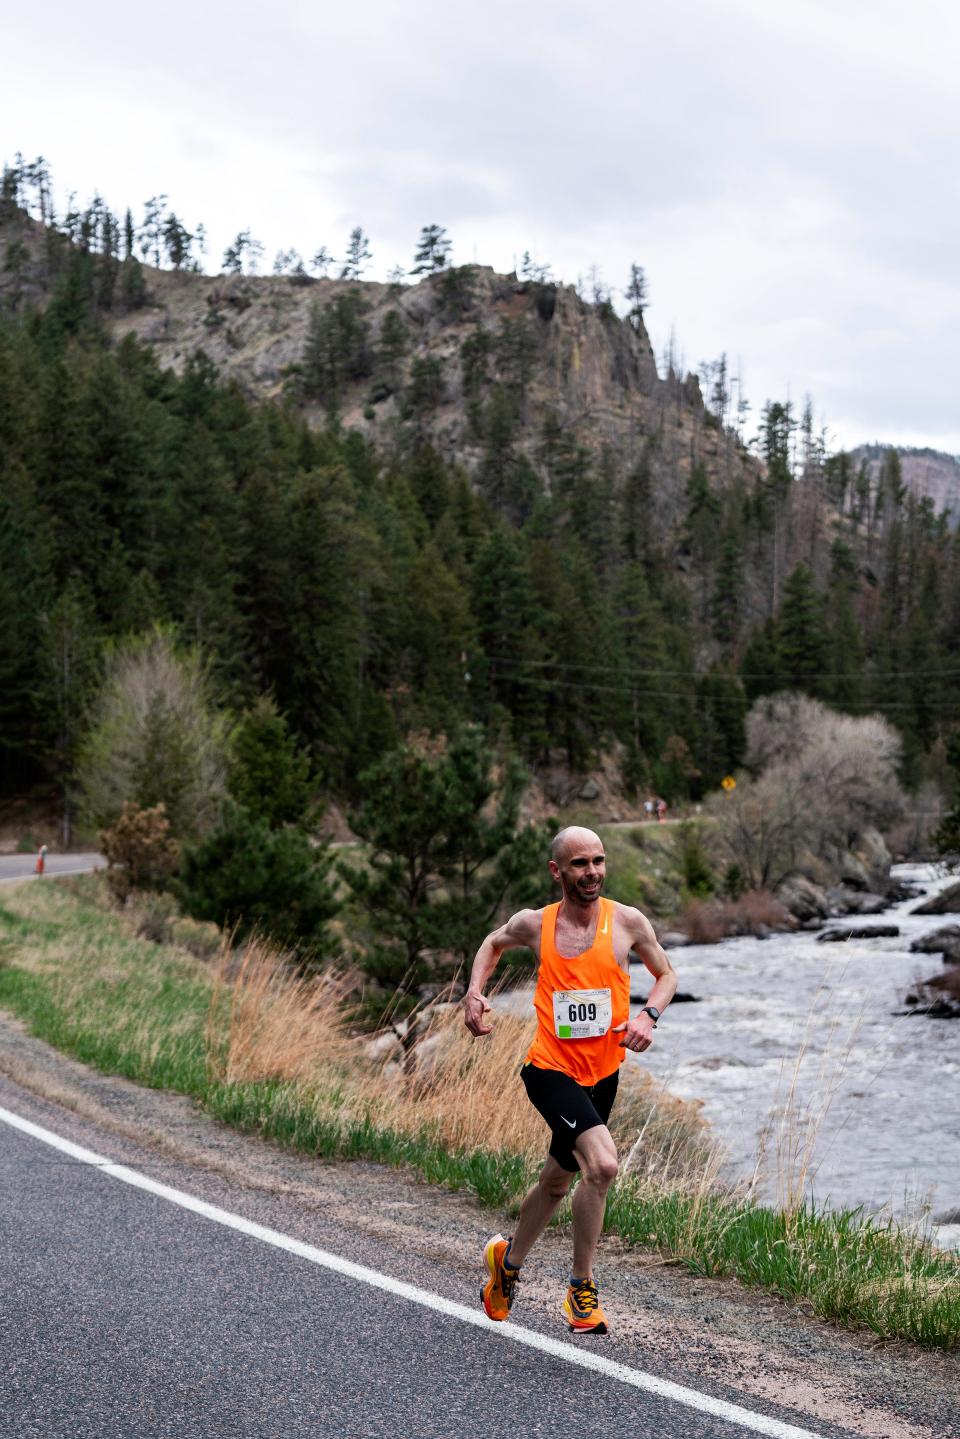 Matthew Drake comes down Poudre Canyon during the Colorado Marathon on Sunday, May 7, 2023. Drake finished with a time of 2:36:59 to place 5th overall.